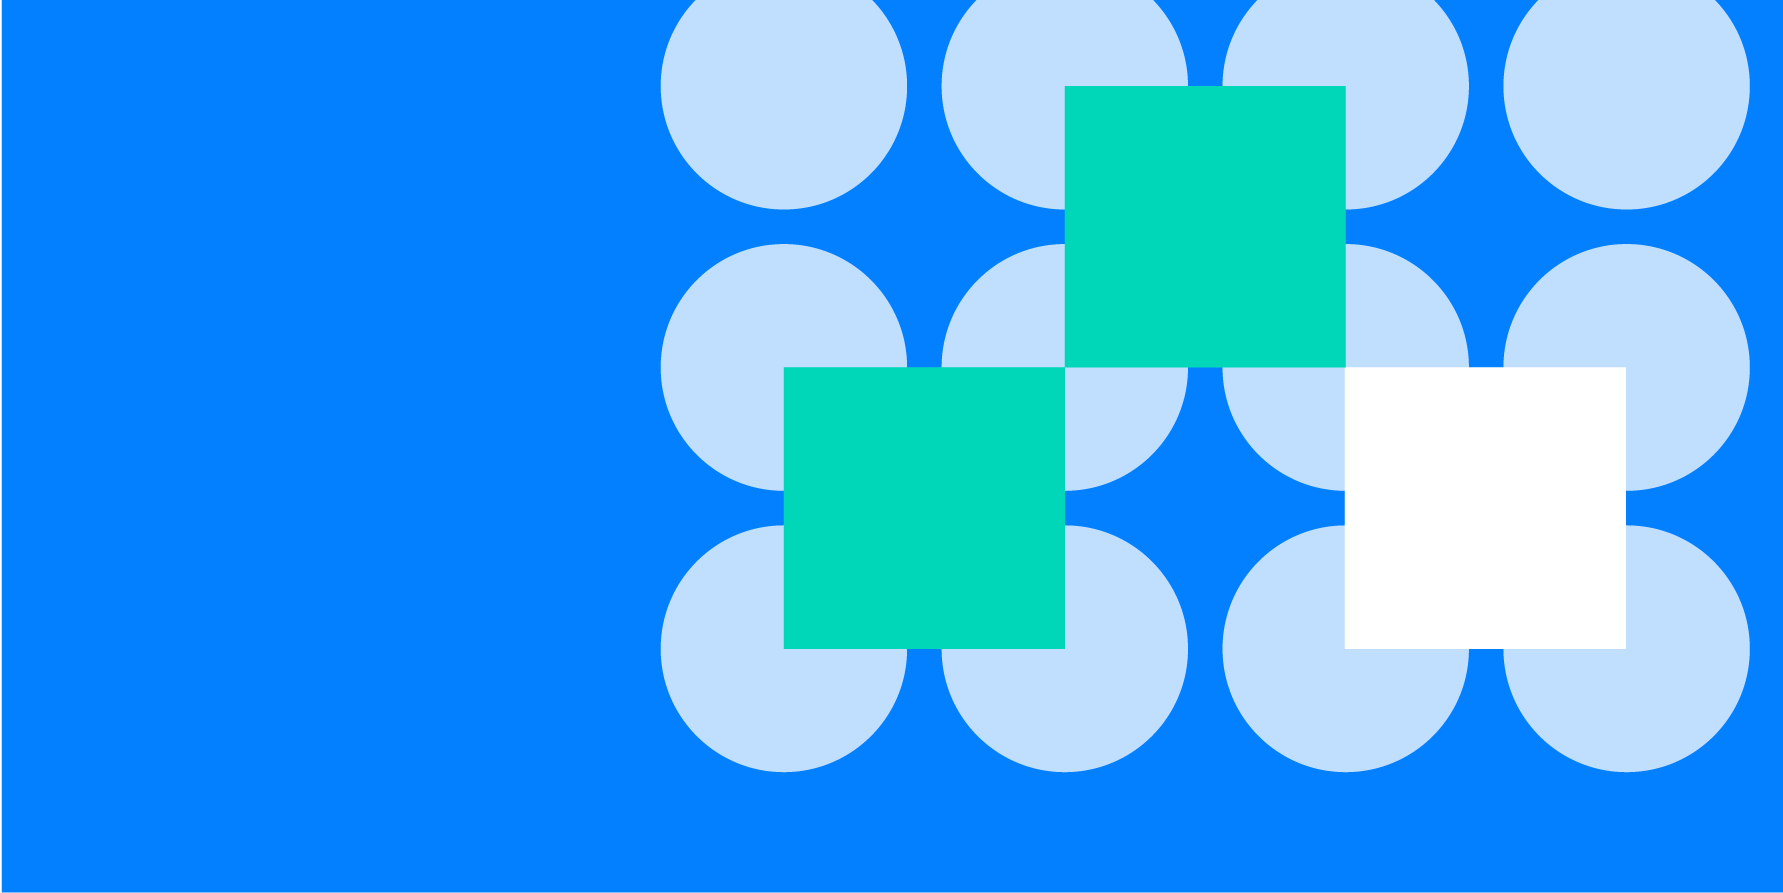 Illustration of two green squares and one white square overlapping a grid of light blue circles on a darker blue background